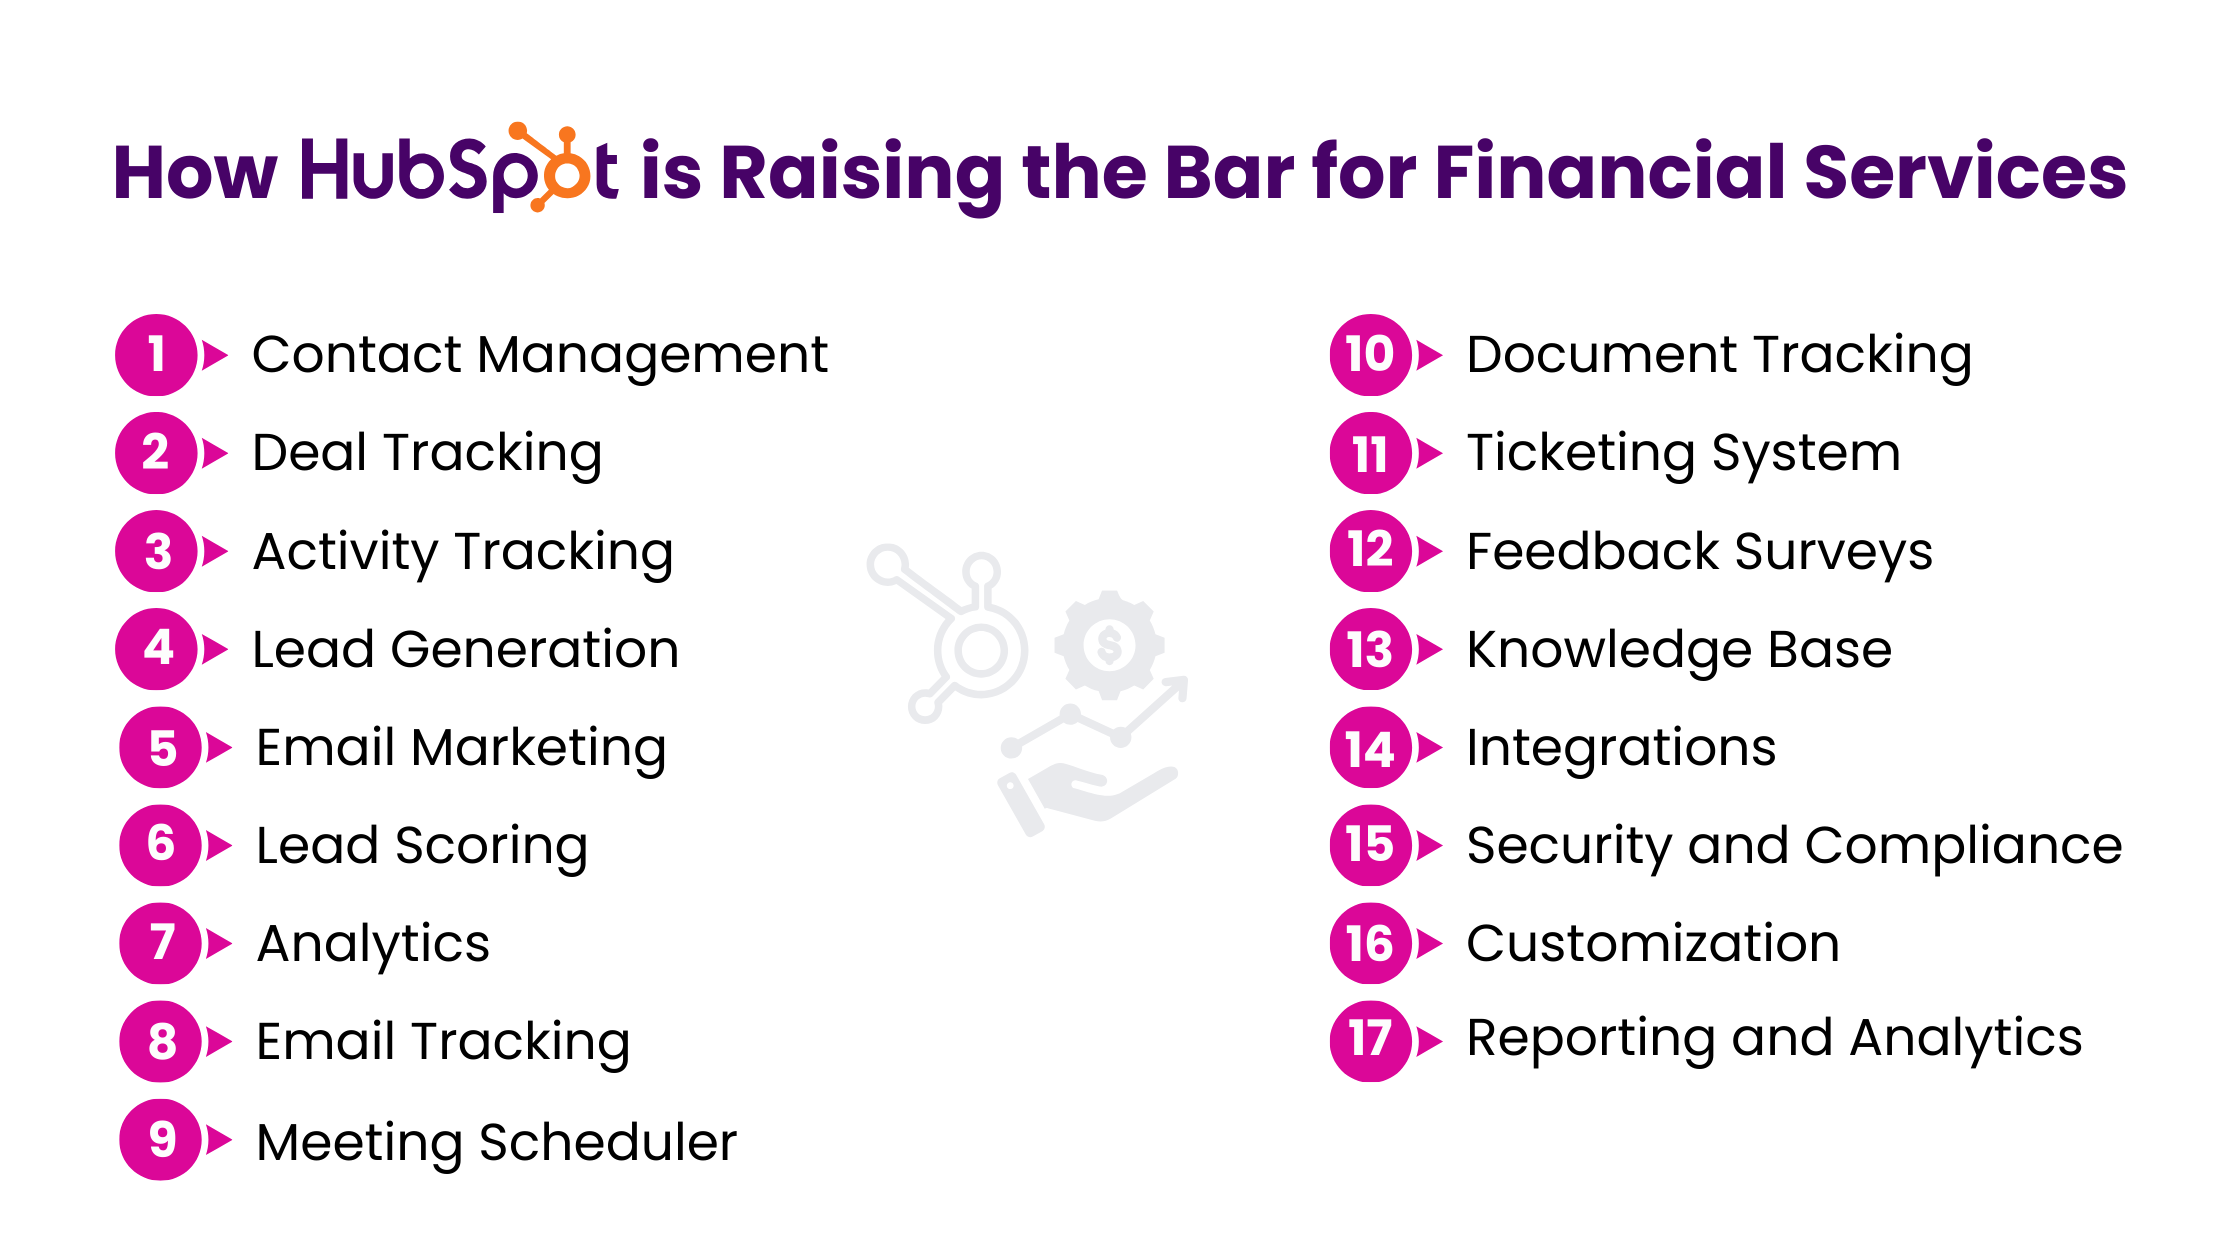 How HubSpot is Raising Bars for Financial Services